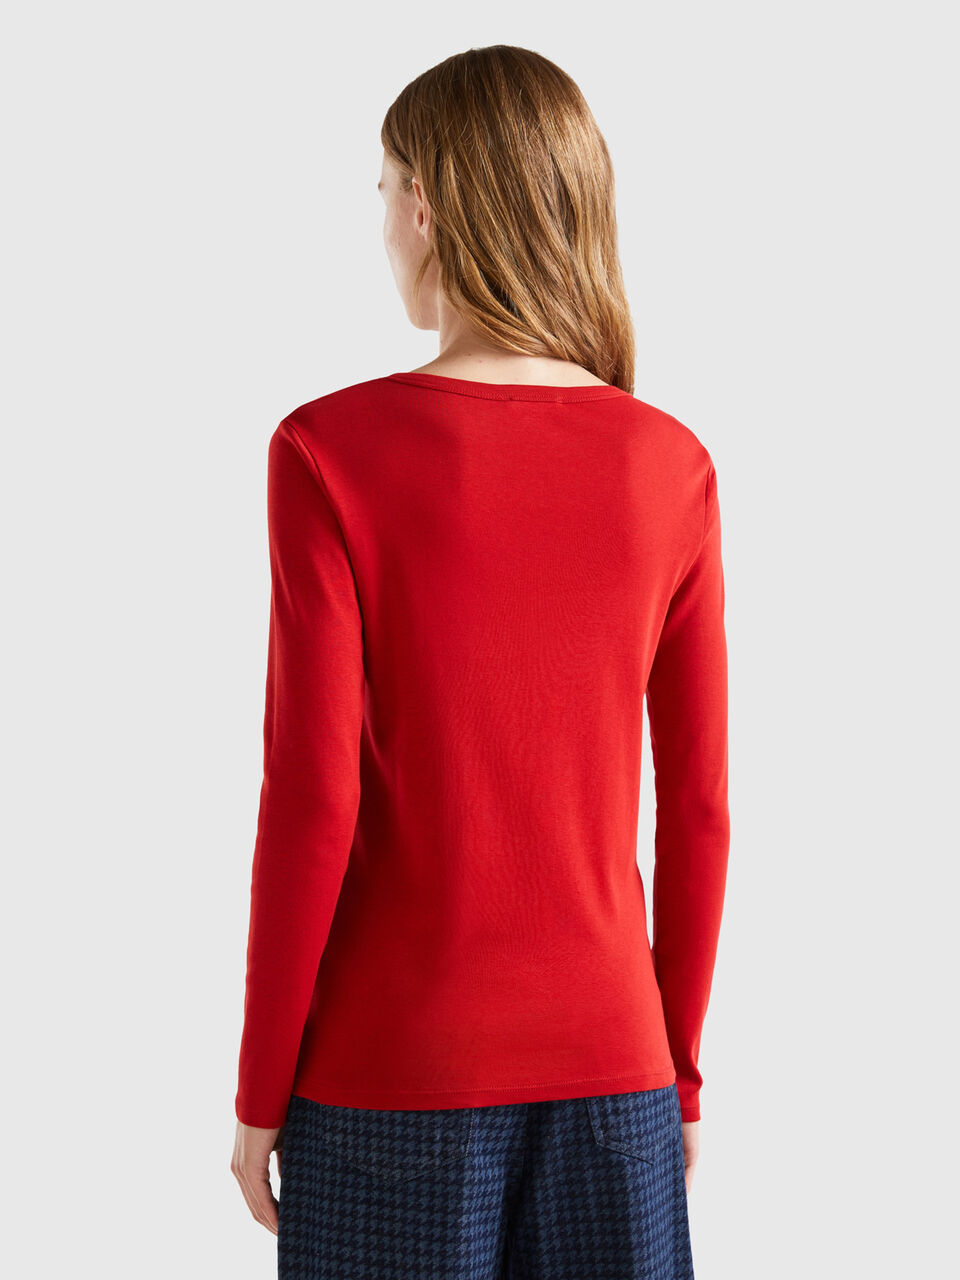 Long Benetton | red - Red t-shirt sleeve